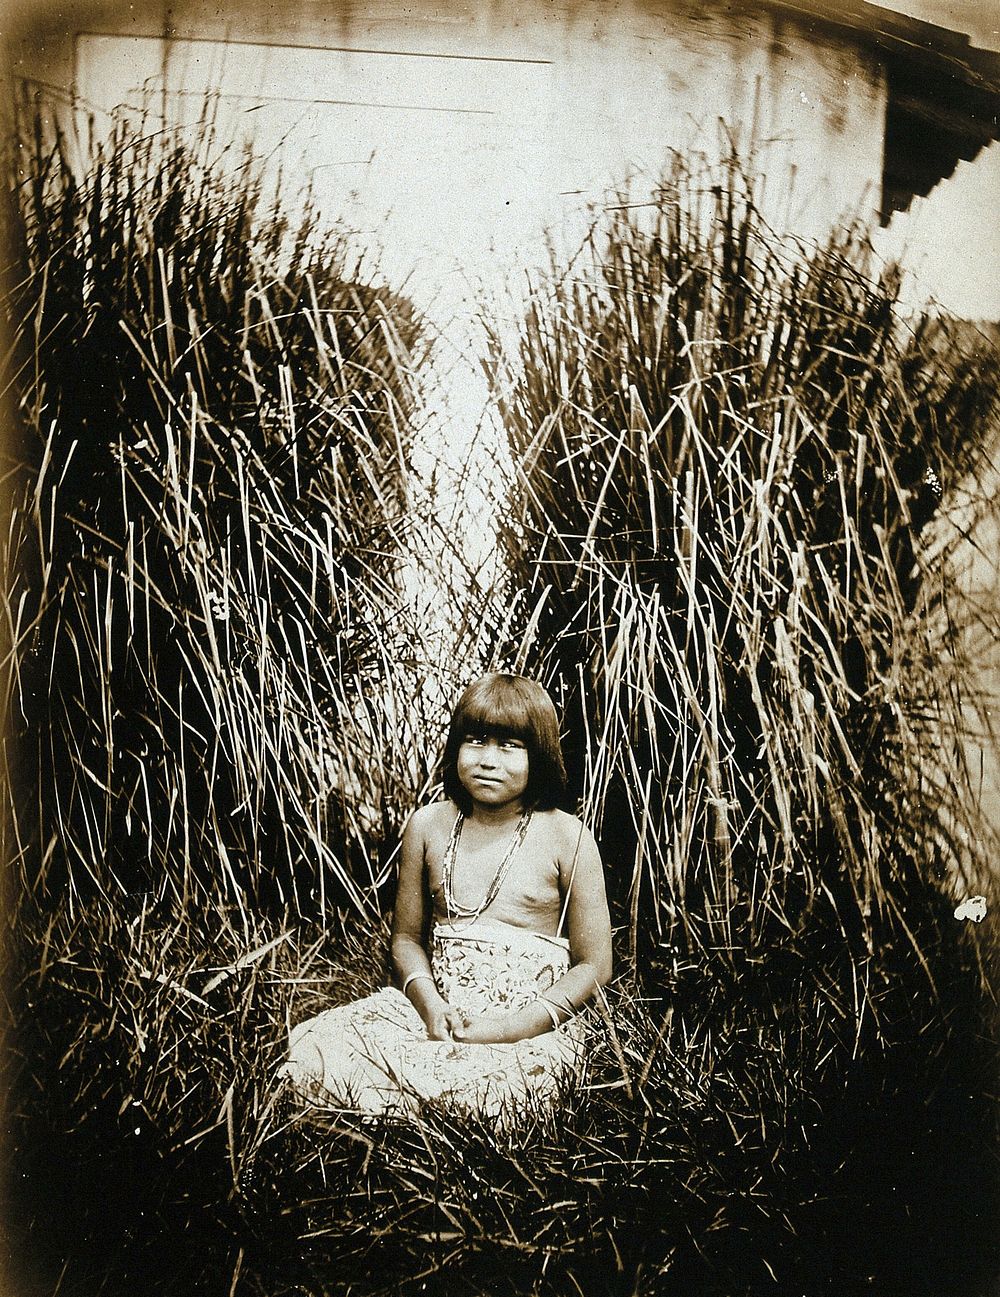 An Amazonian Indian child, next to a whitewashed wall with tall grasses all around.